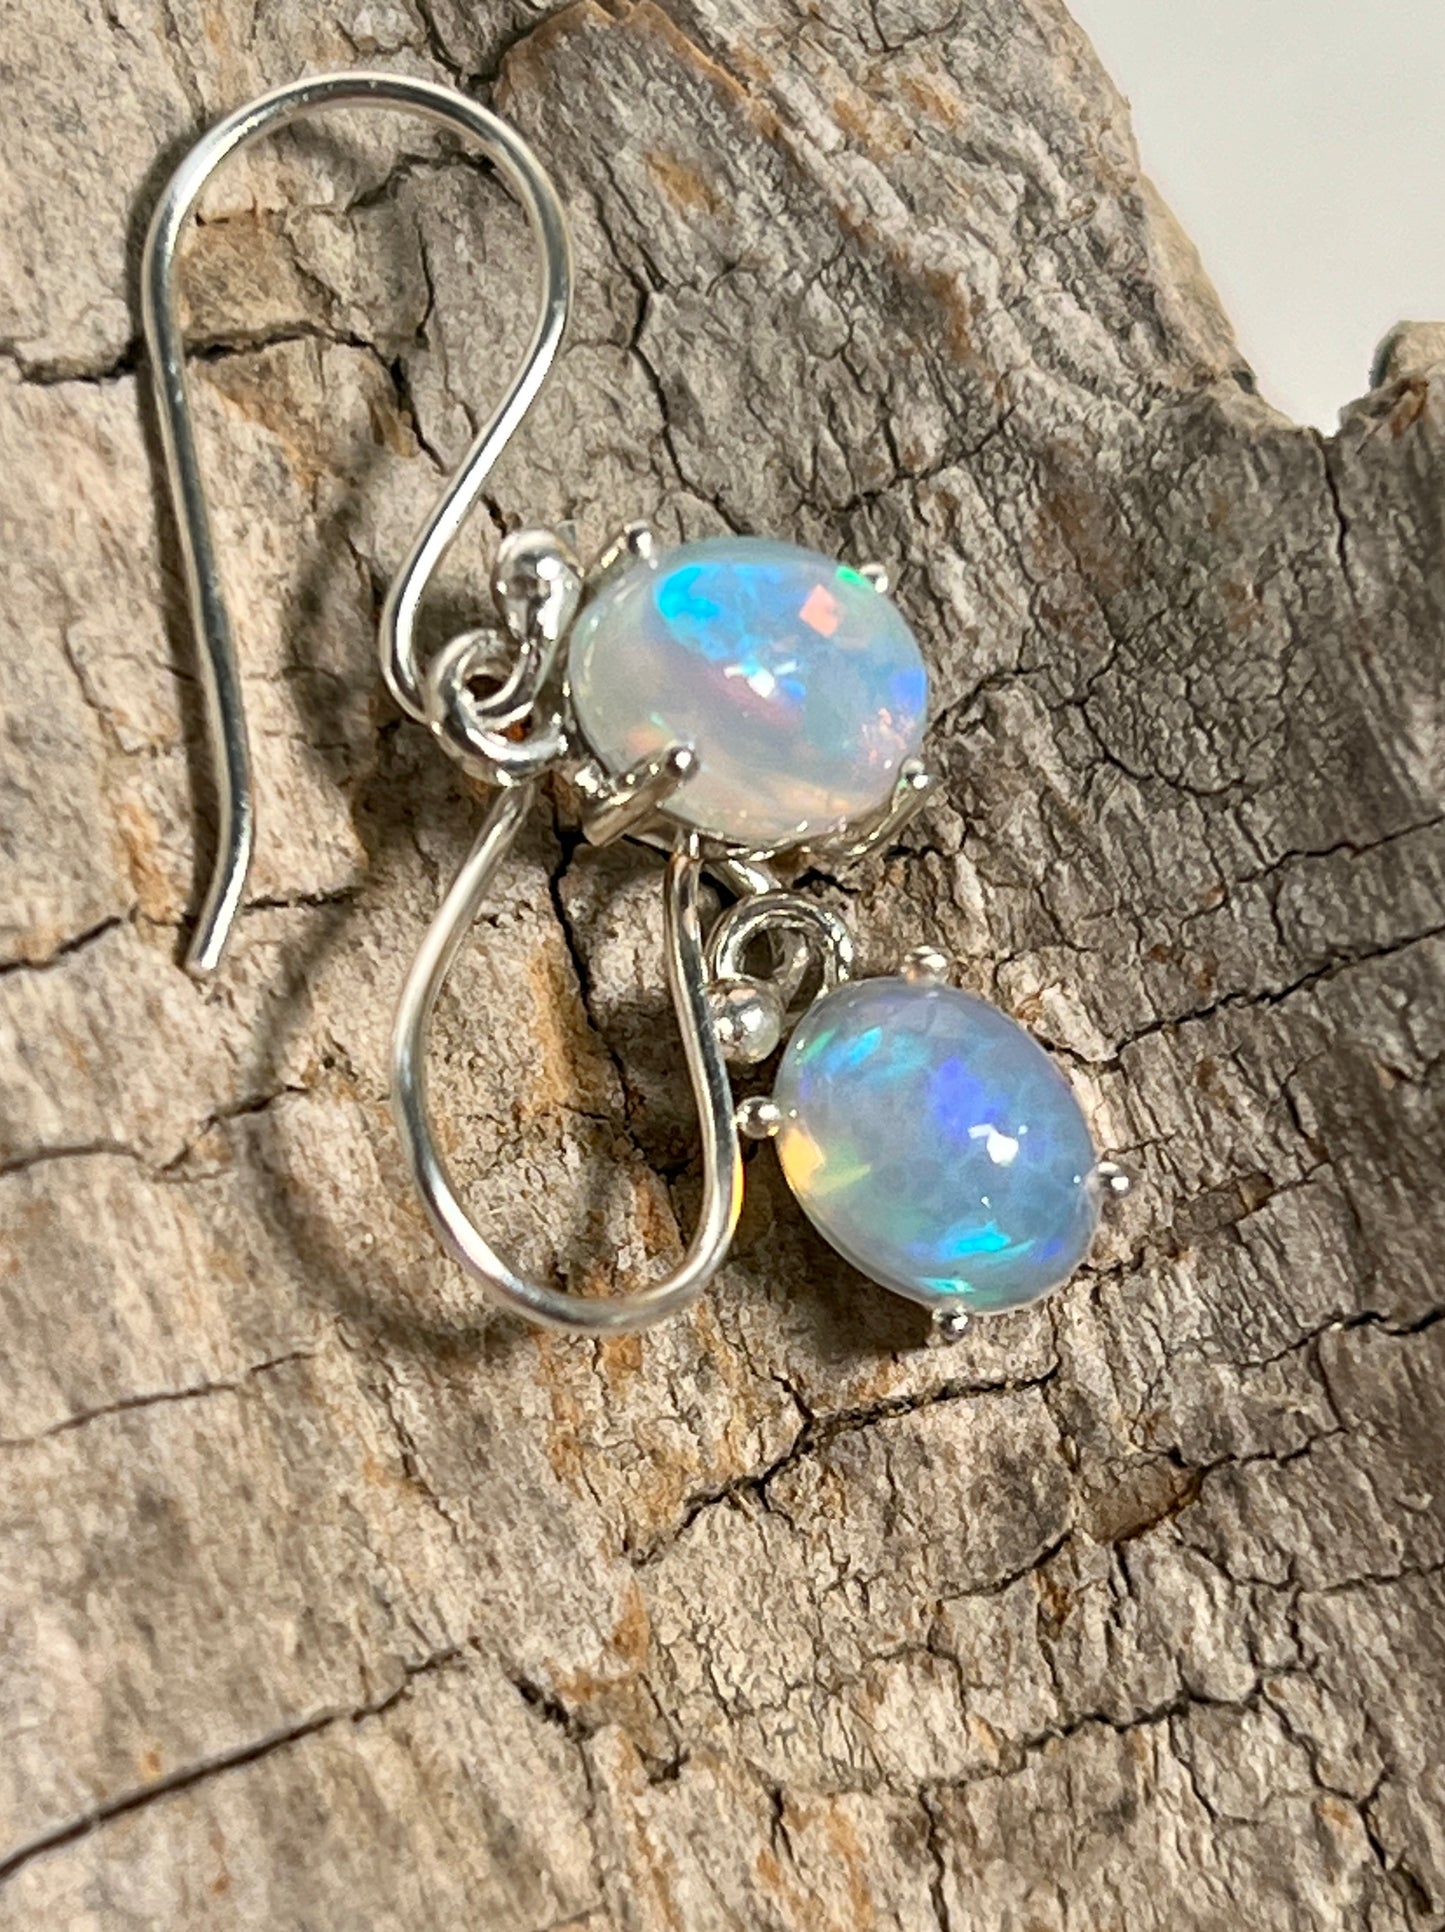 
                  
                    A pair of Super Silver Vibrant Oval Ethiopian Opal Earrings glowing with vibrant hues and natural brilliance, delicately displayed on a piece of wood.
                  
                